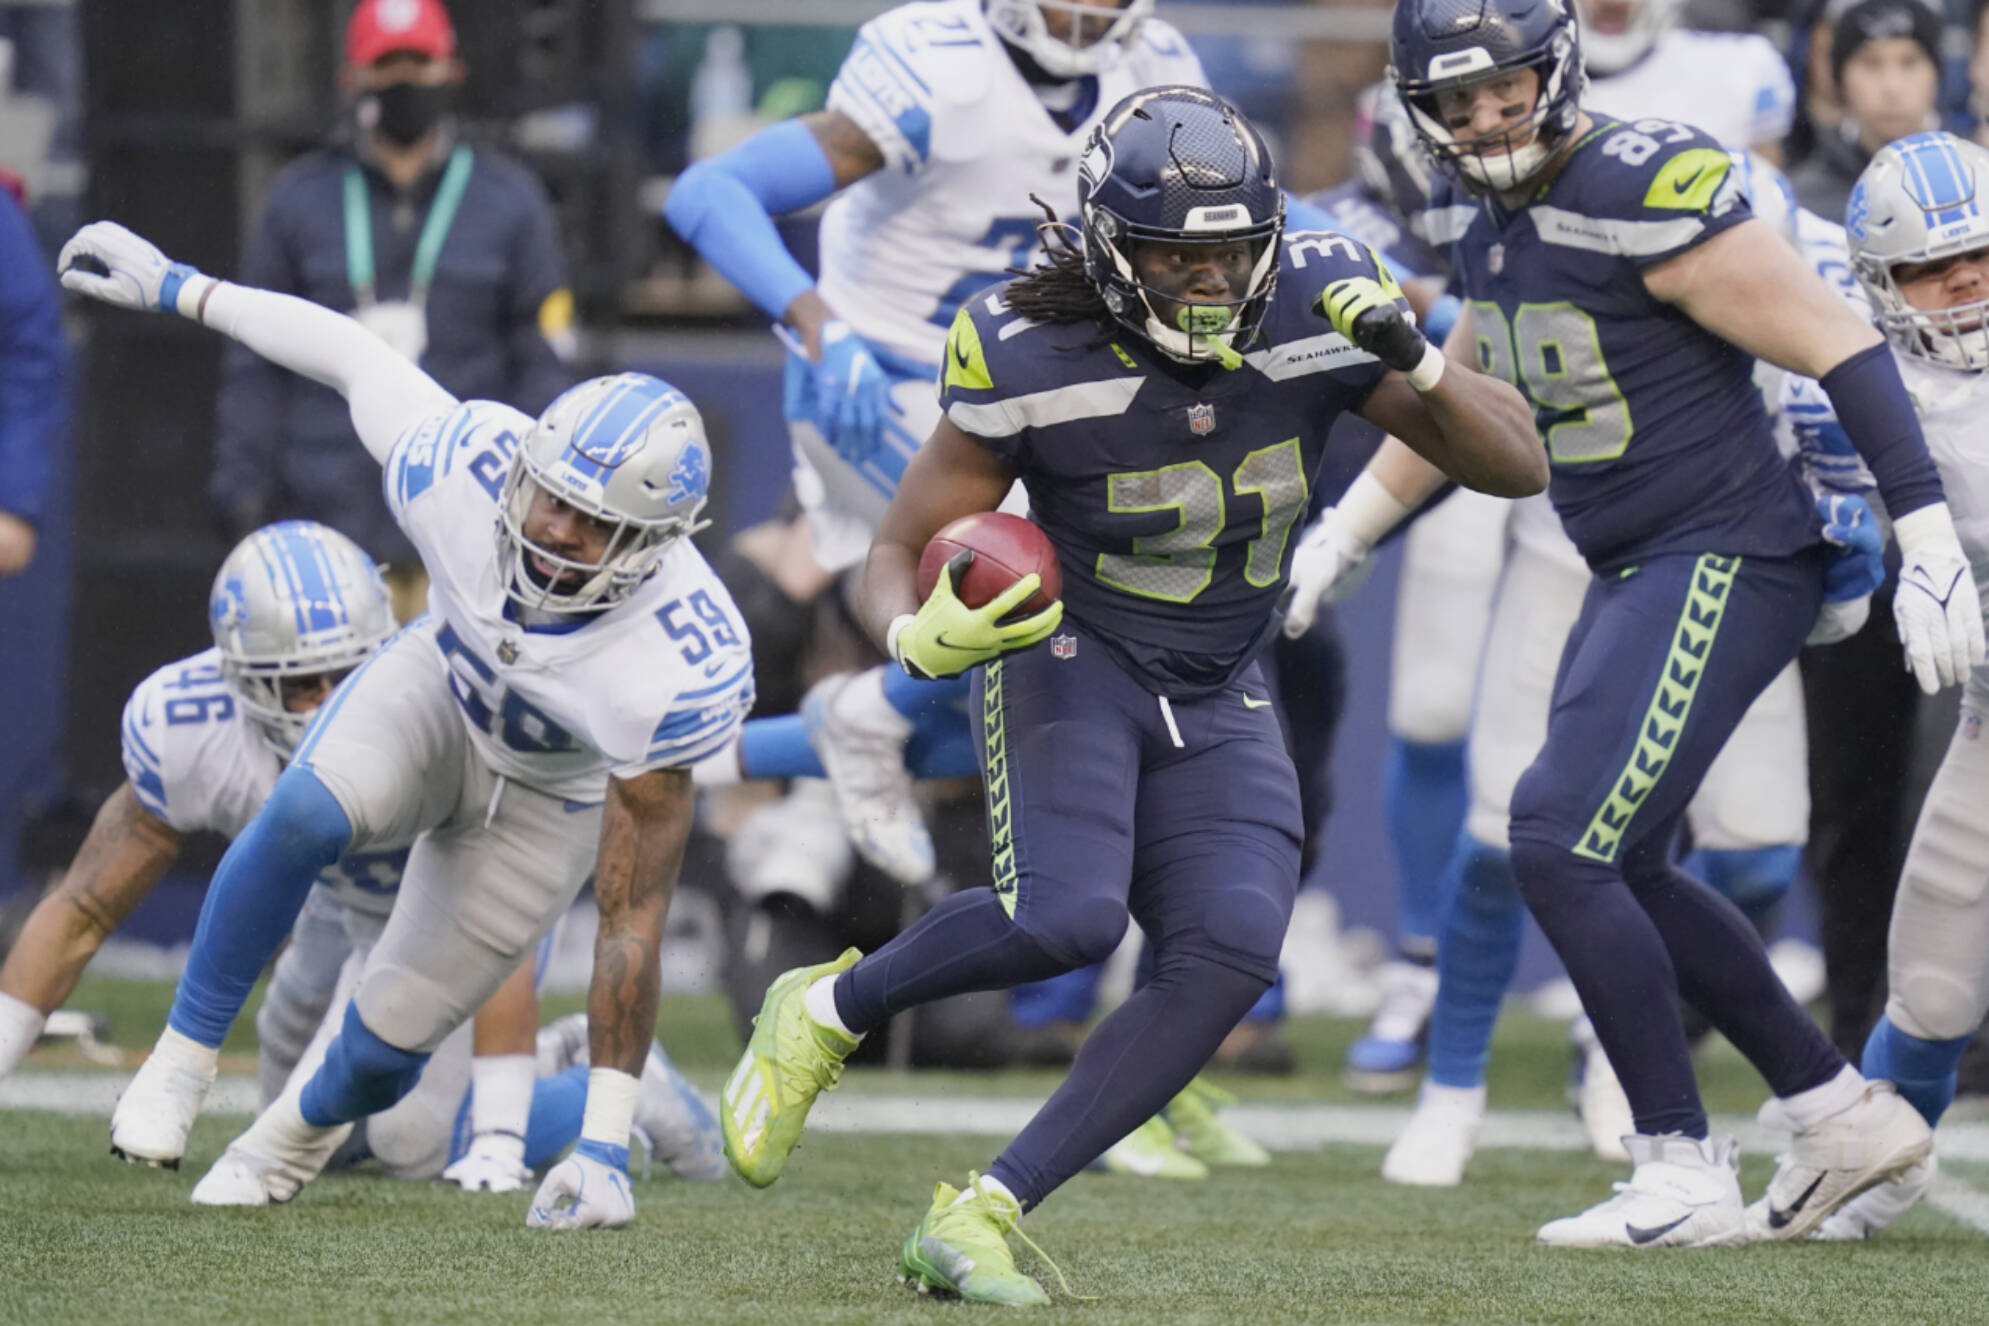 Seattle Seahawks running back DeeJay Dallas (31) runs the ball against the Detroit Lions during the first half of an NFL football game, Sunday, Jan. 2, 2022, in Seattle. (AP Photo/Elaine Thompson)